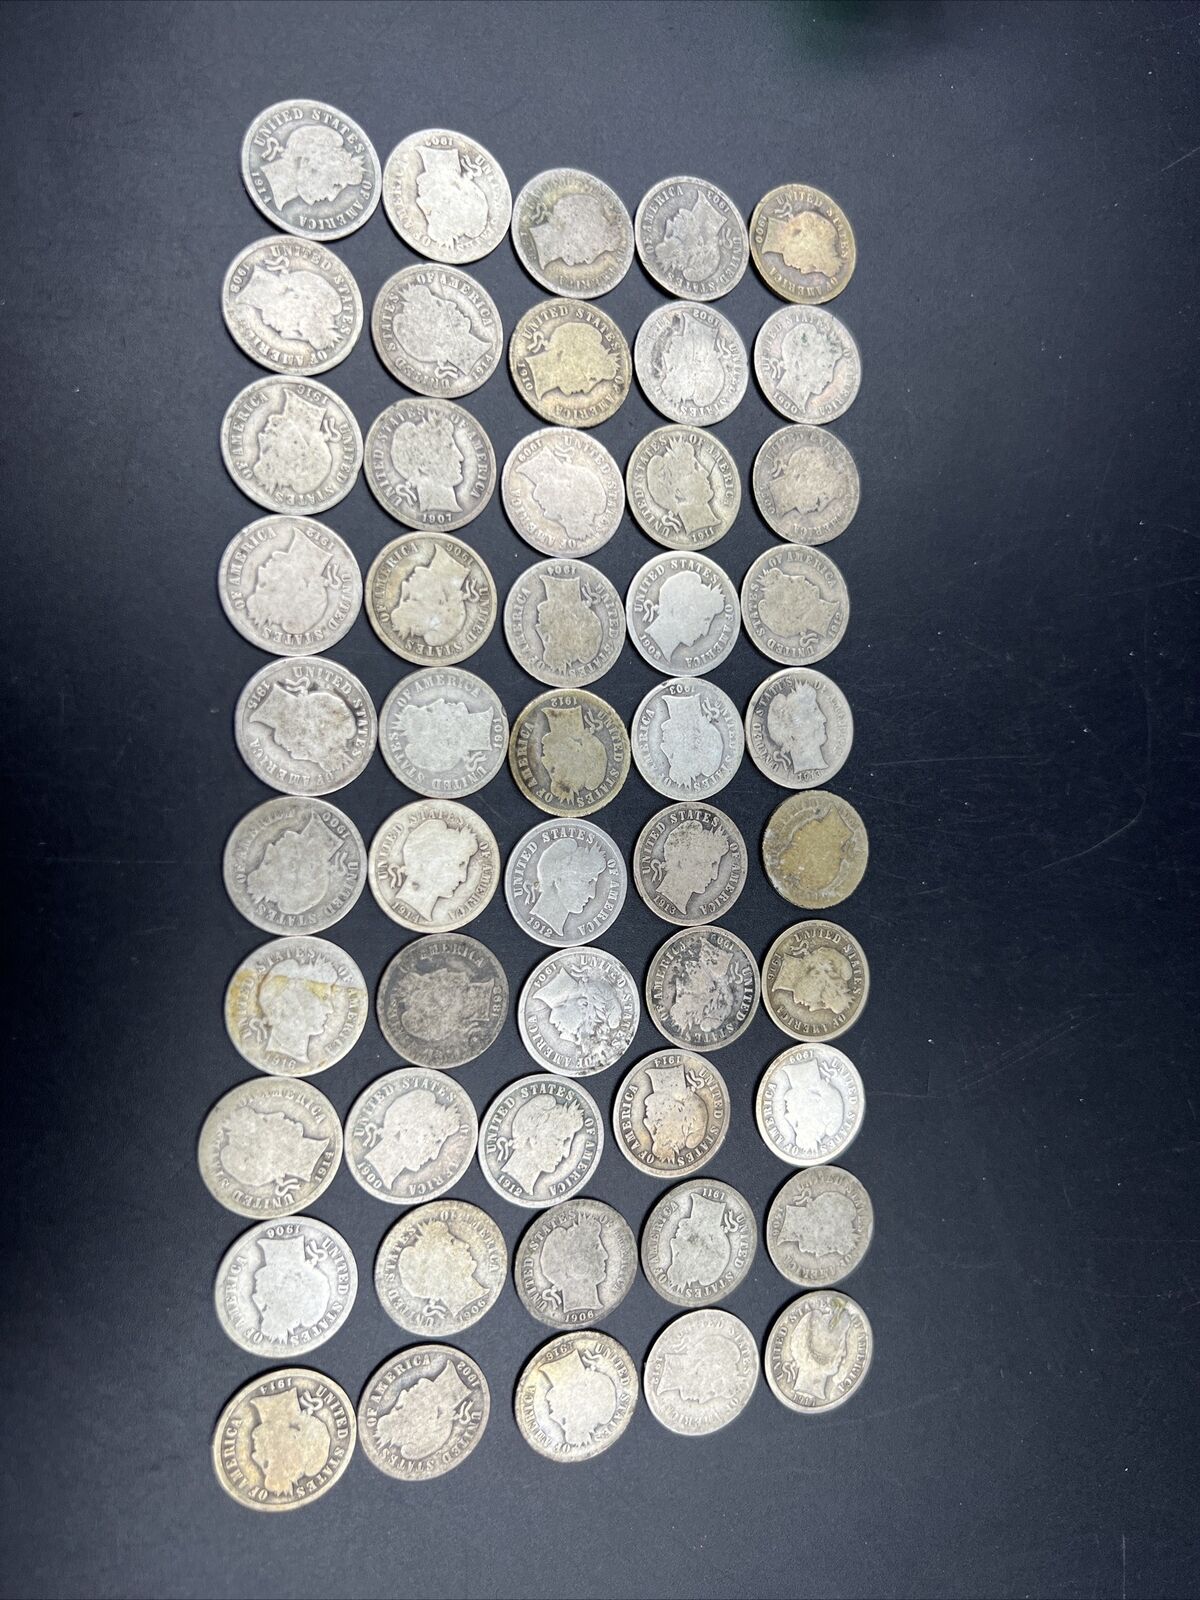 Barber 90% Silver Dimes 50 Coin AG About Good / Good - Very Circ 50 coin Roll #A